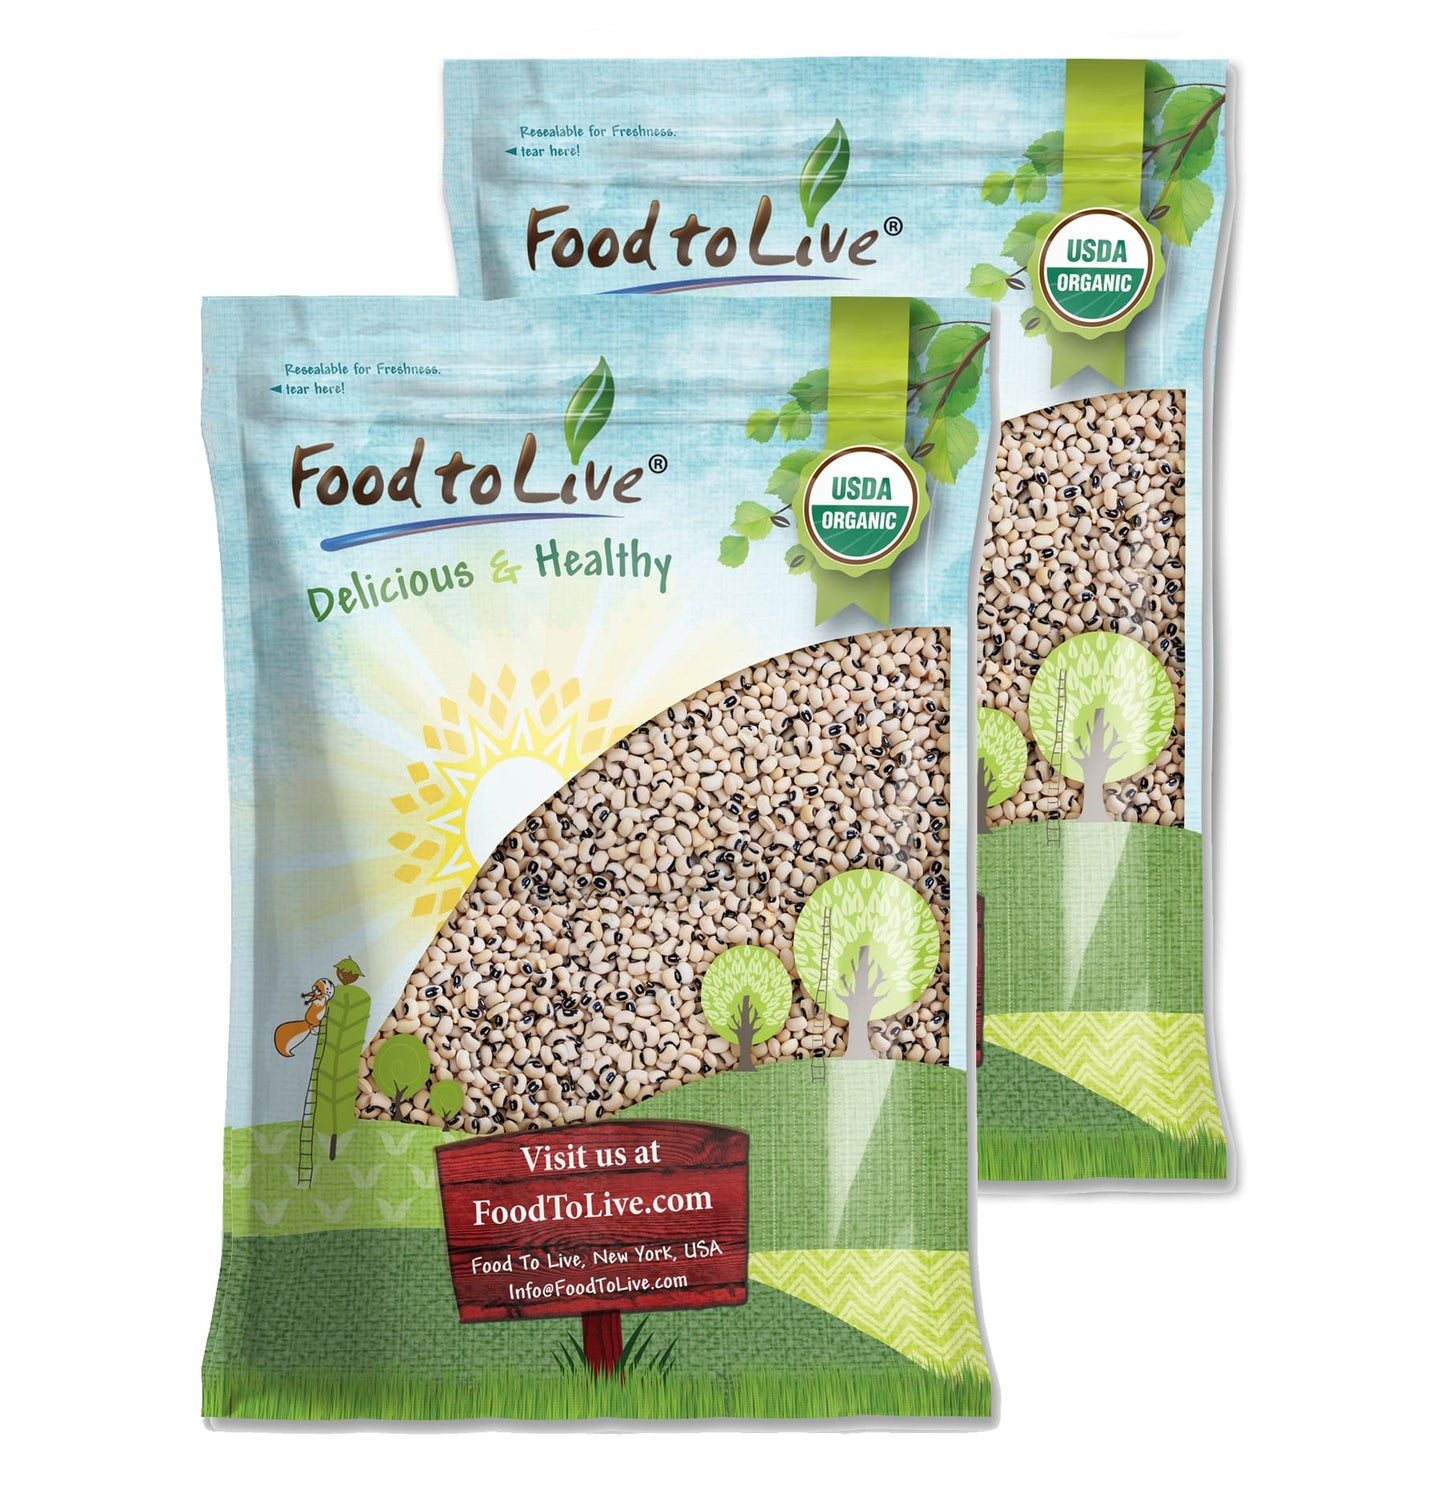 Organic Black-Eyed Peas - Raw Dried Cow Peas, Non-GMO, Kosher, Bulk Beans, Product of the USA - by Food to Live